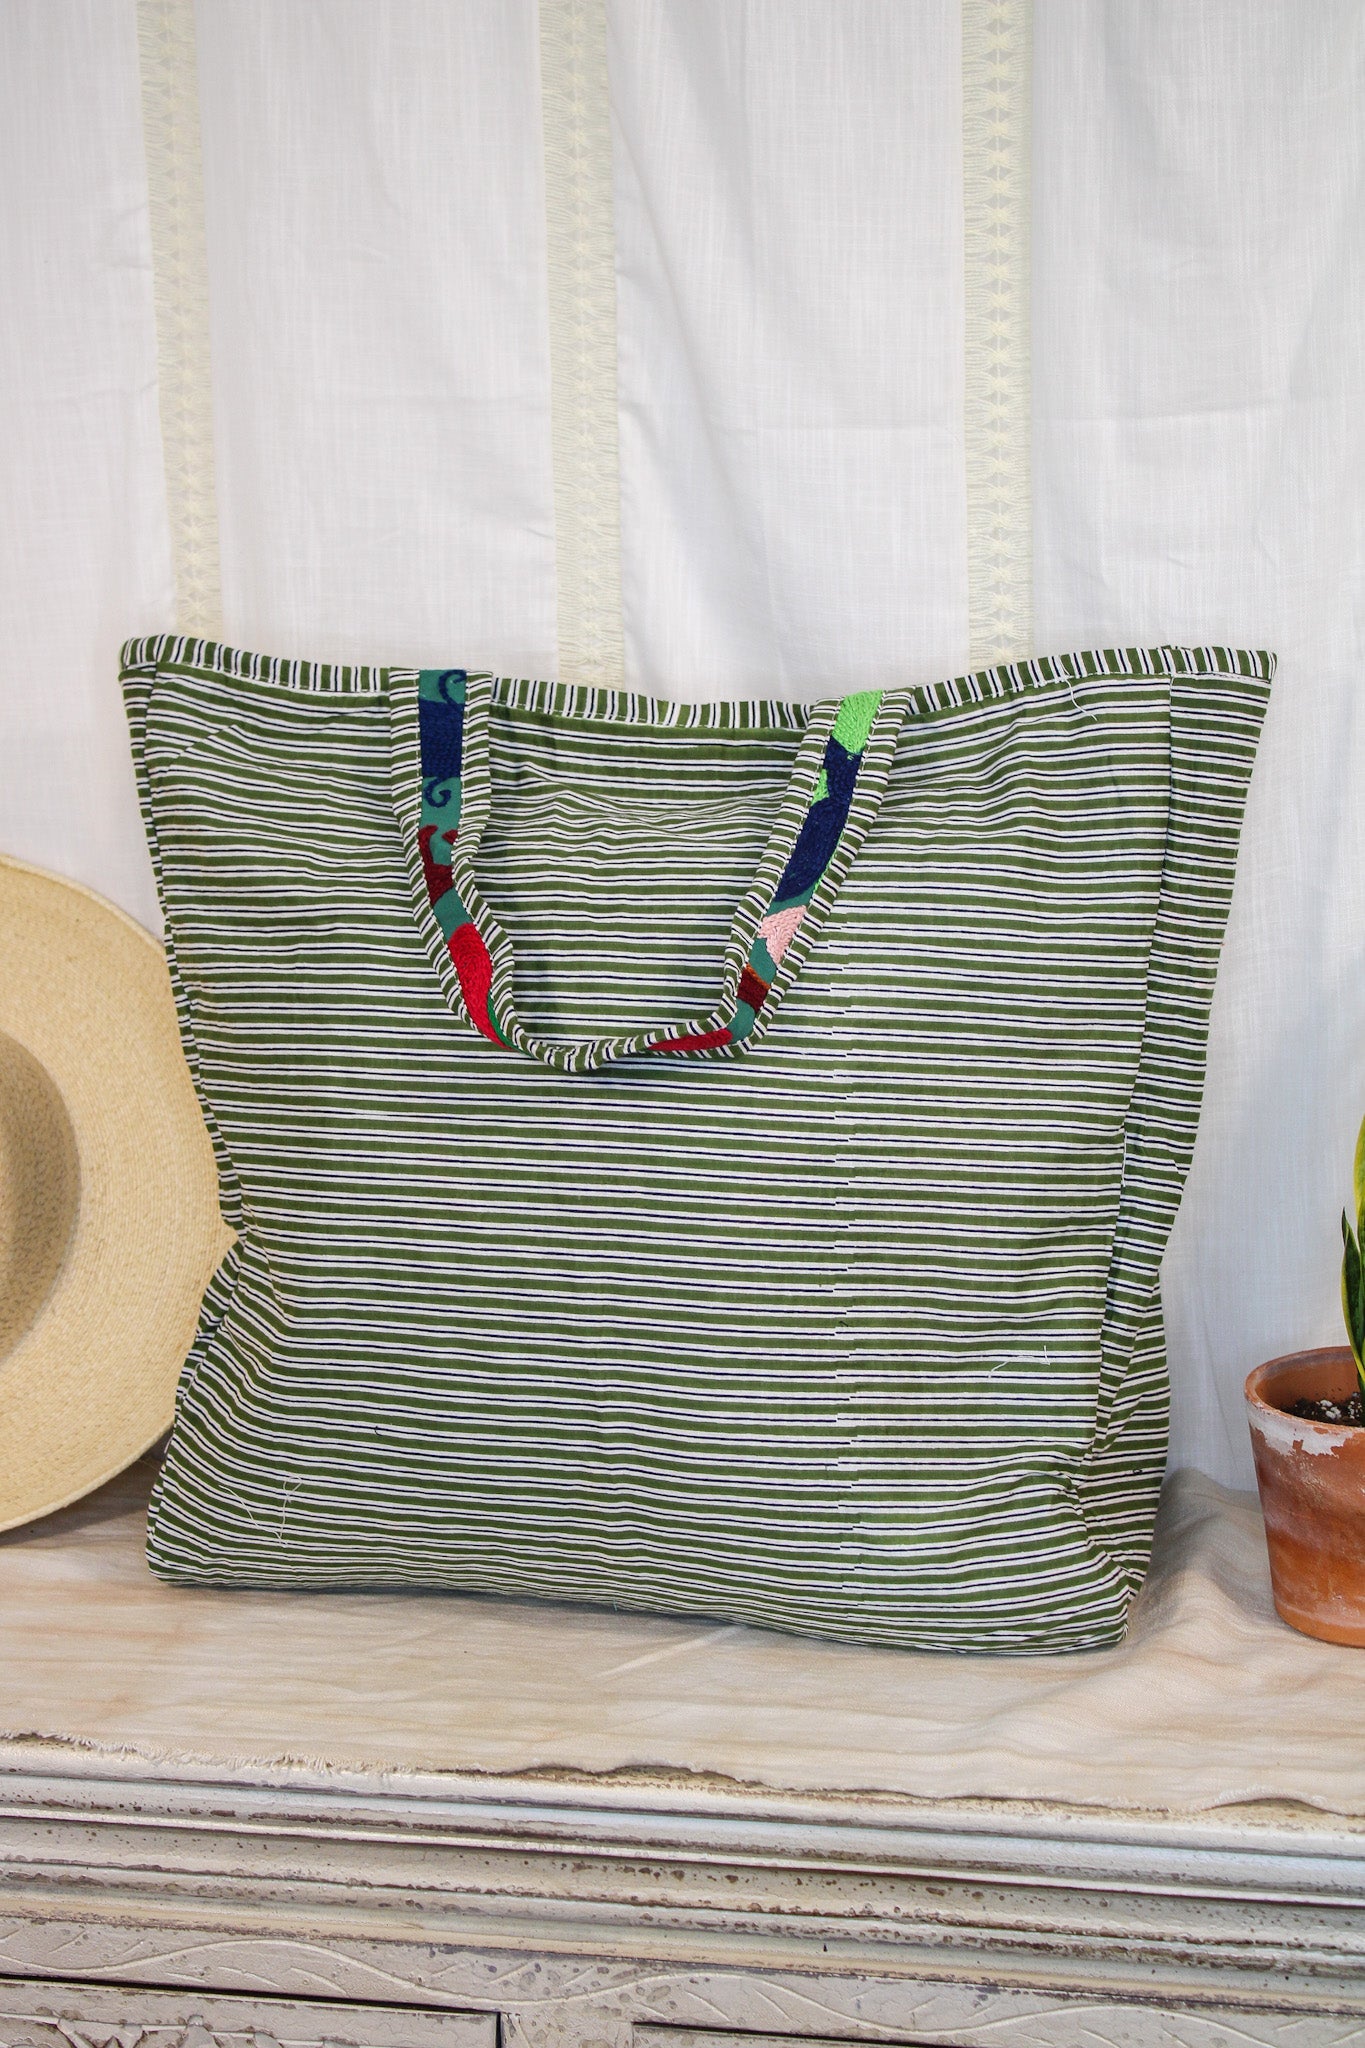  Friday Finds - Straw Beach Tote